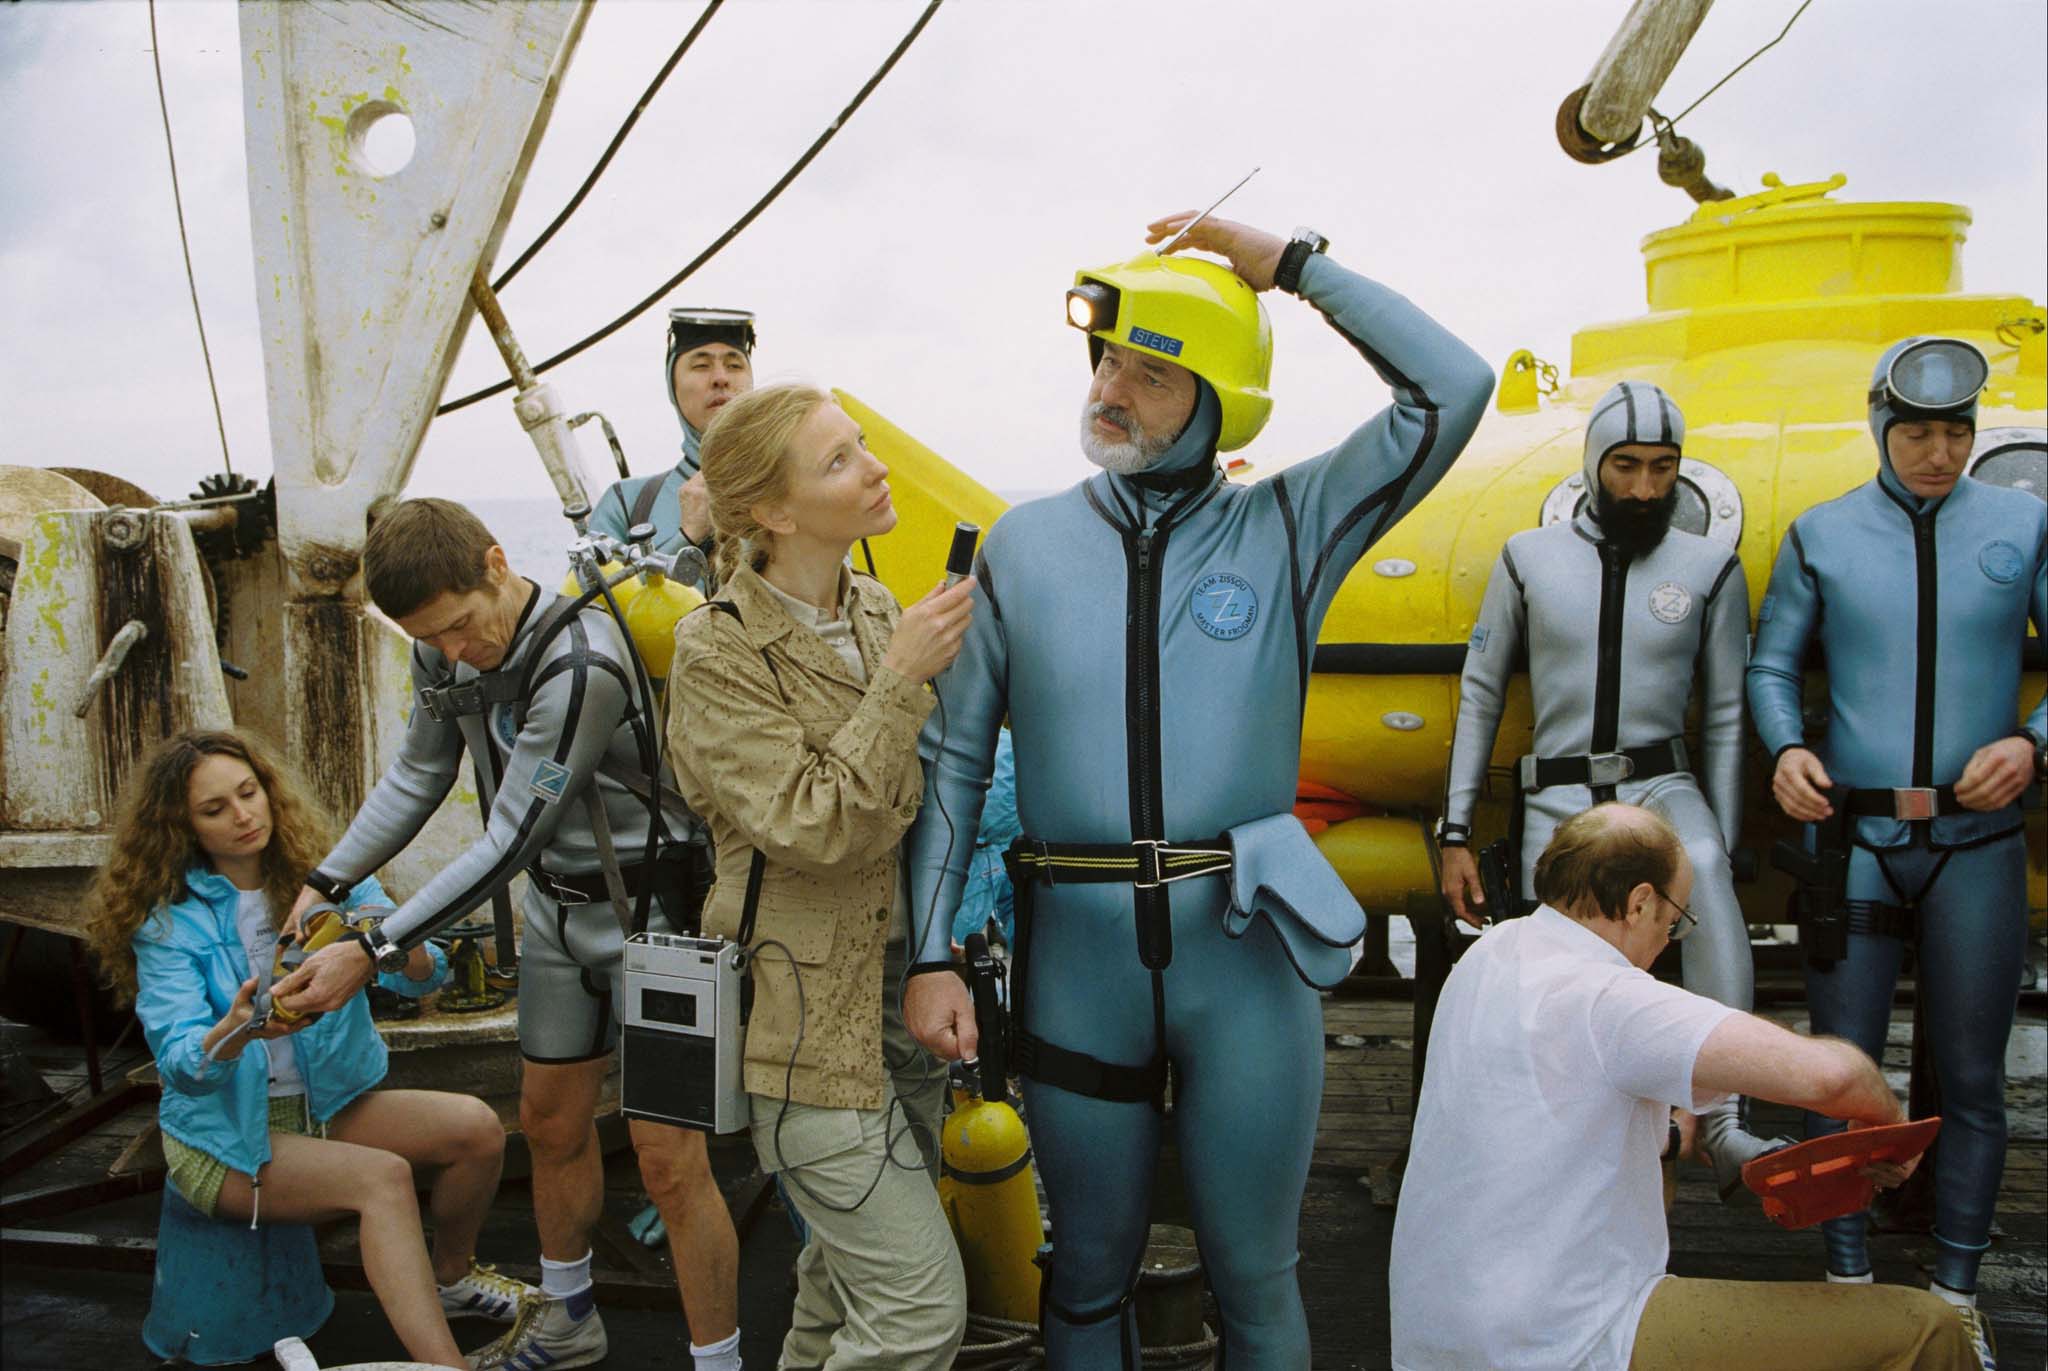 Wes Anderson Movies Ranked From Worst To Best – IndieWire